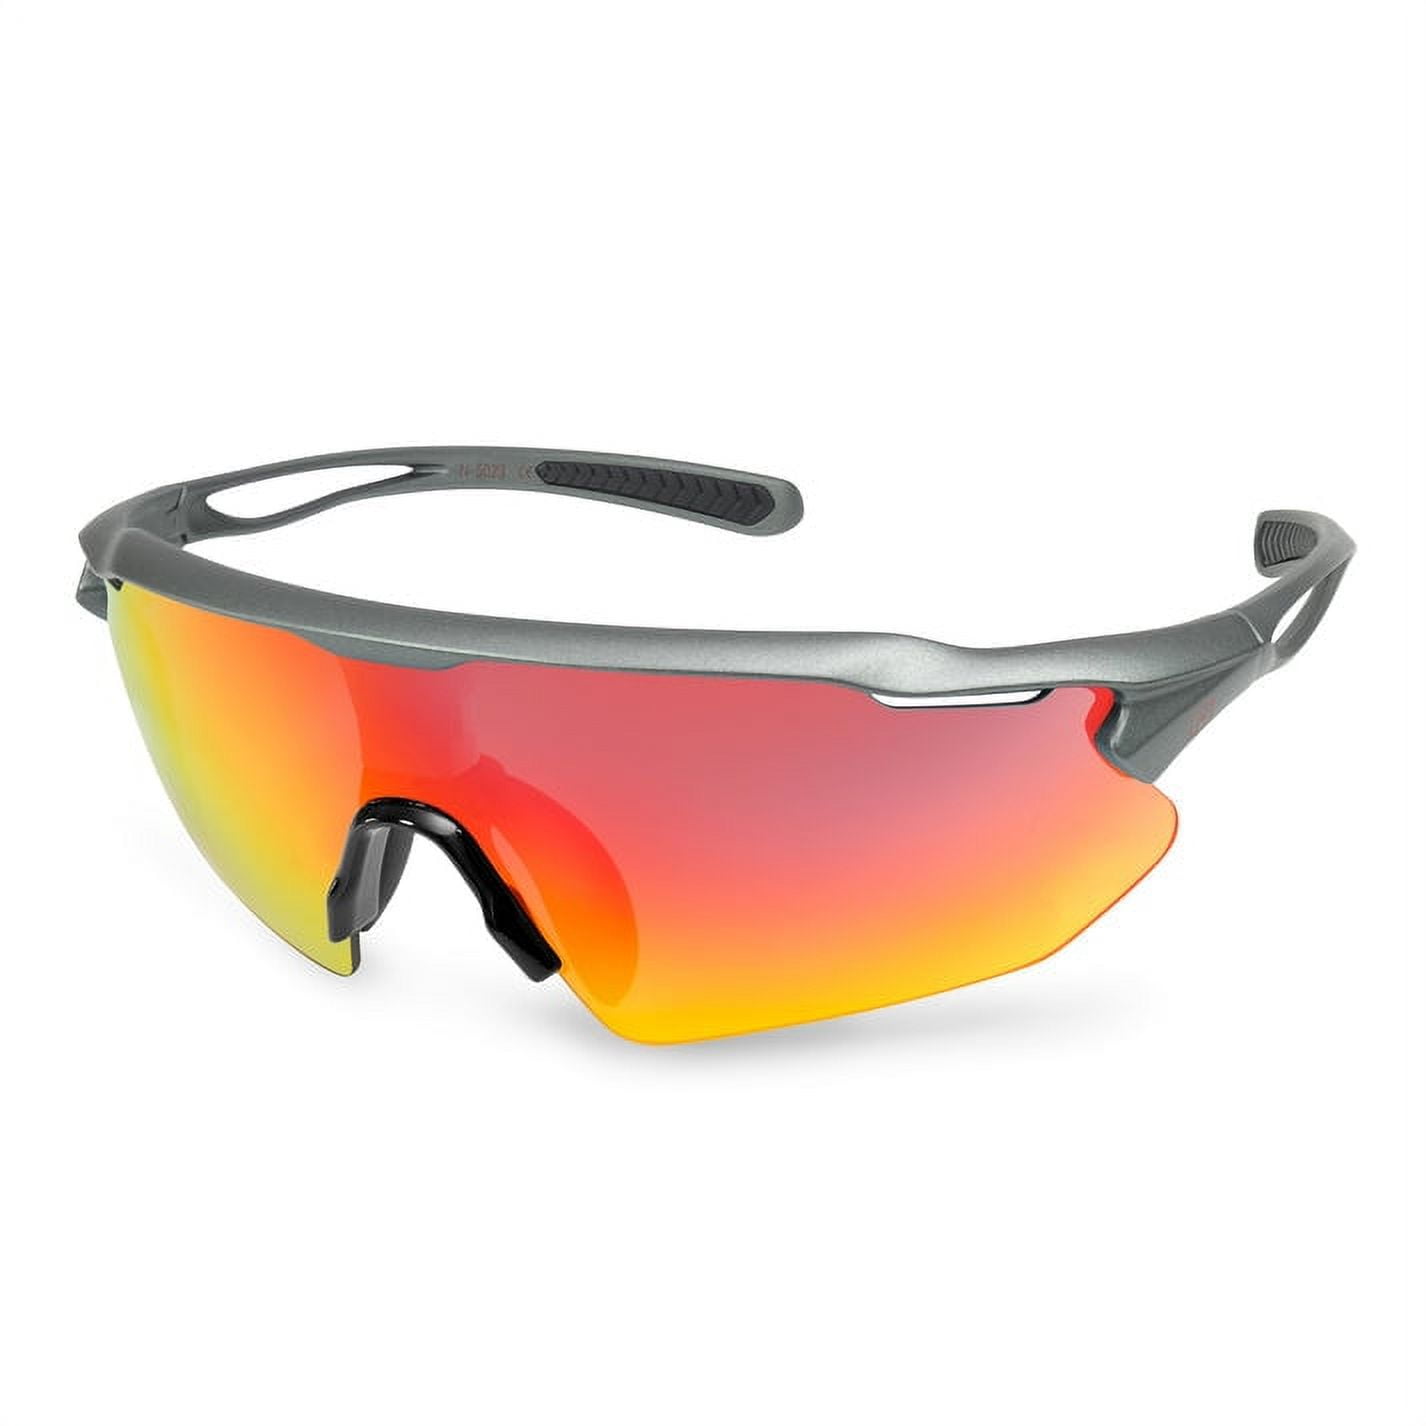 AKSEL Cycling Glasses-TR90 Frame UV Protection for Women Men Sports  Sunglasses 